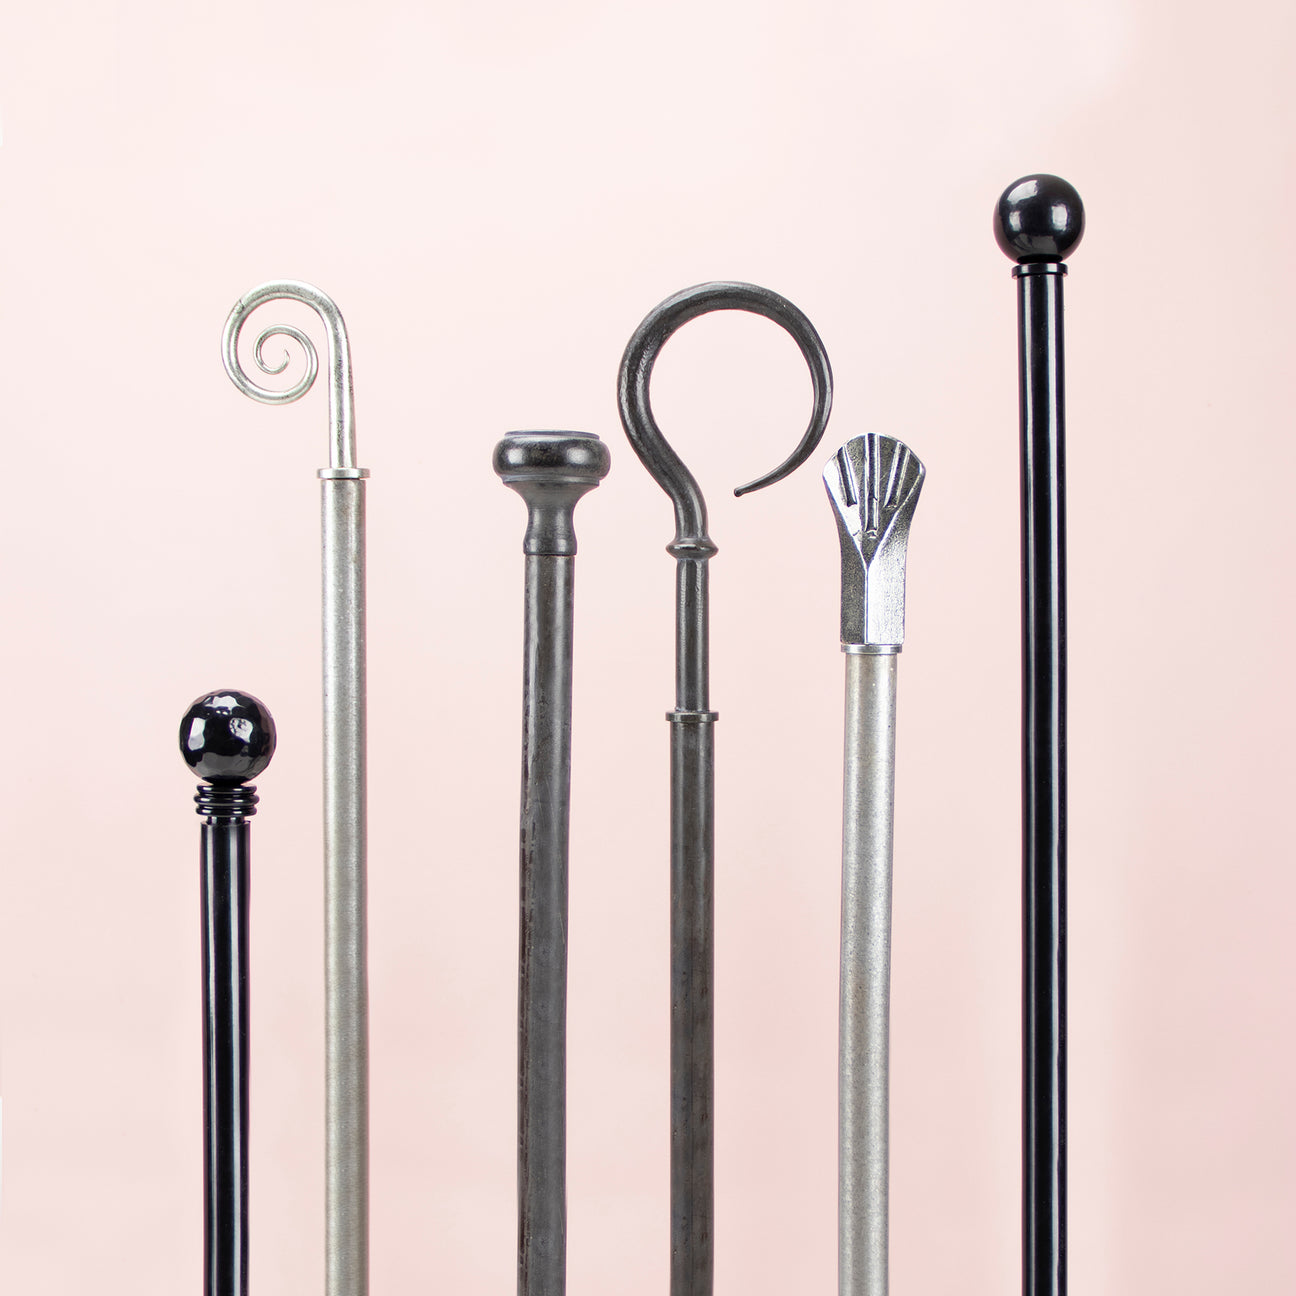 Image showing a range of Curtain Rail Accessories made by From the Anvil